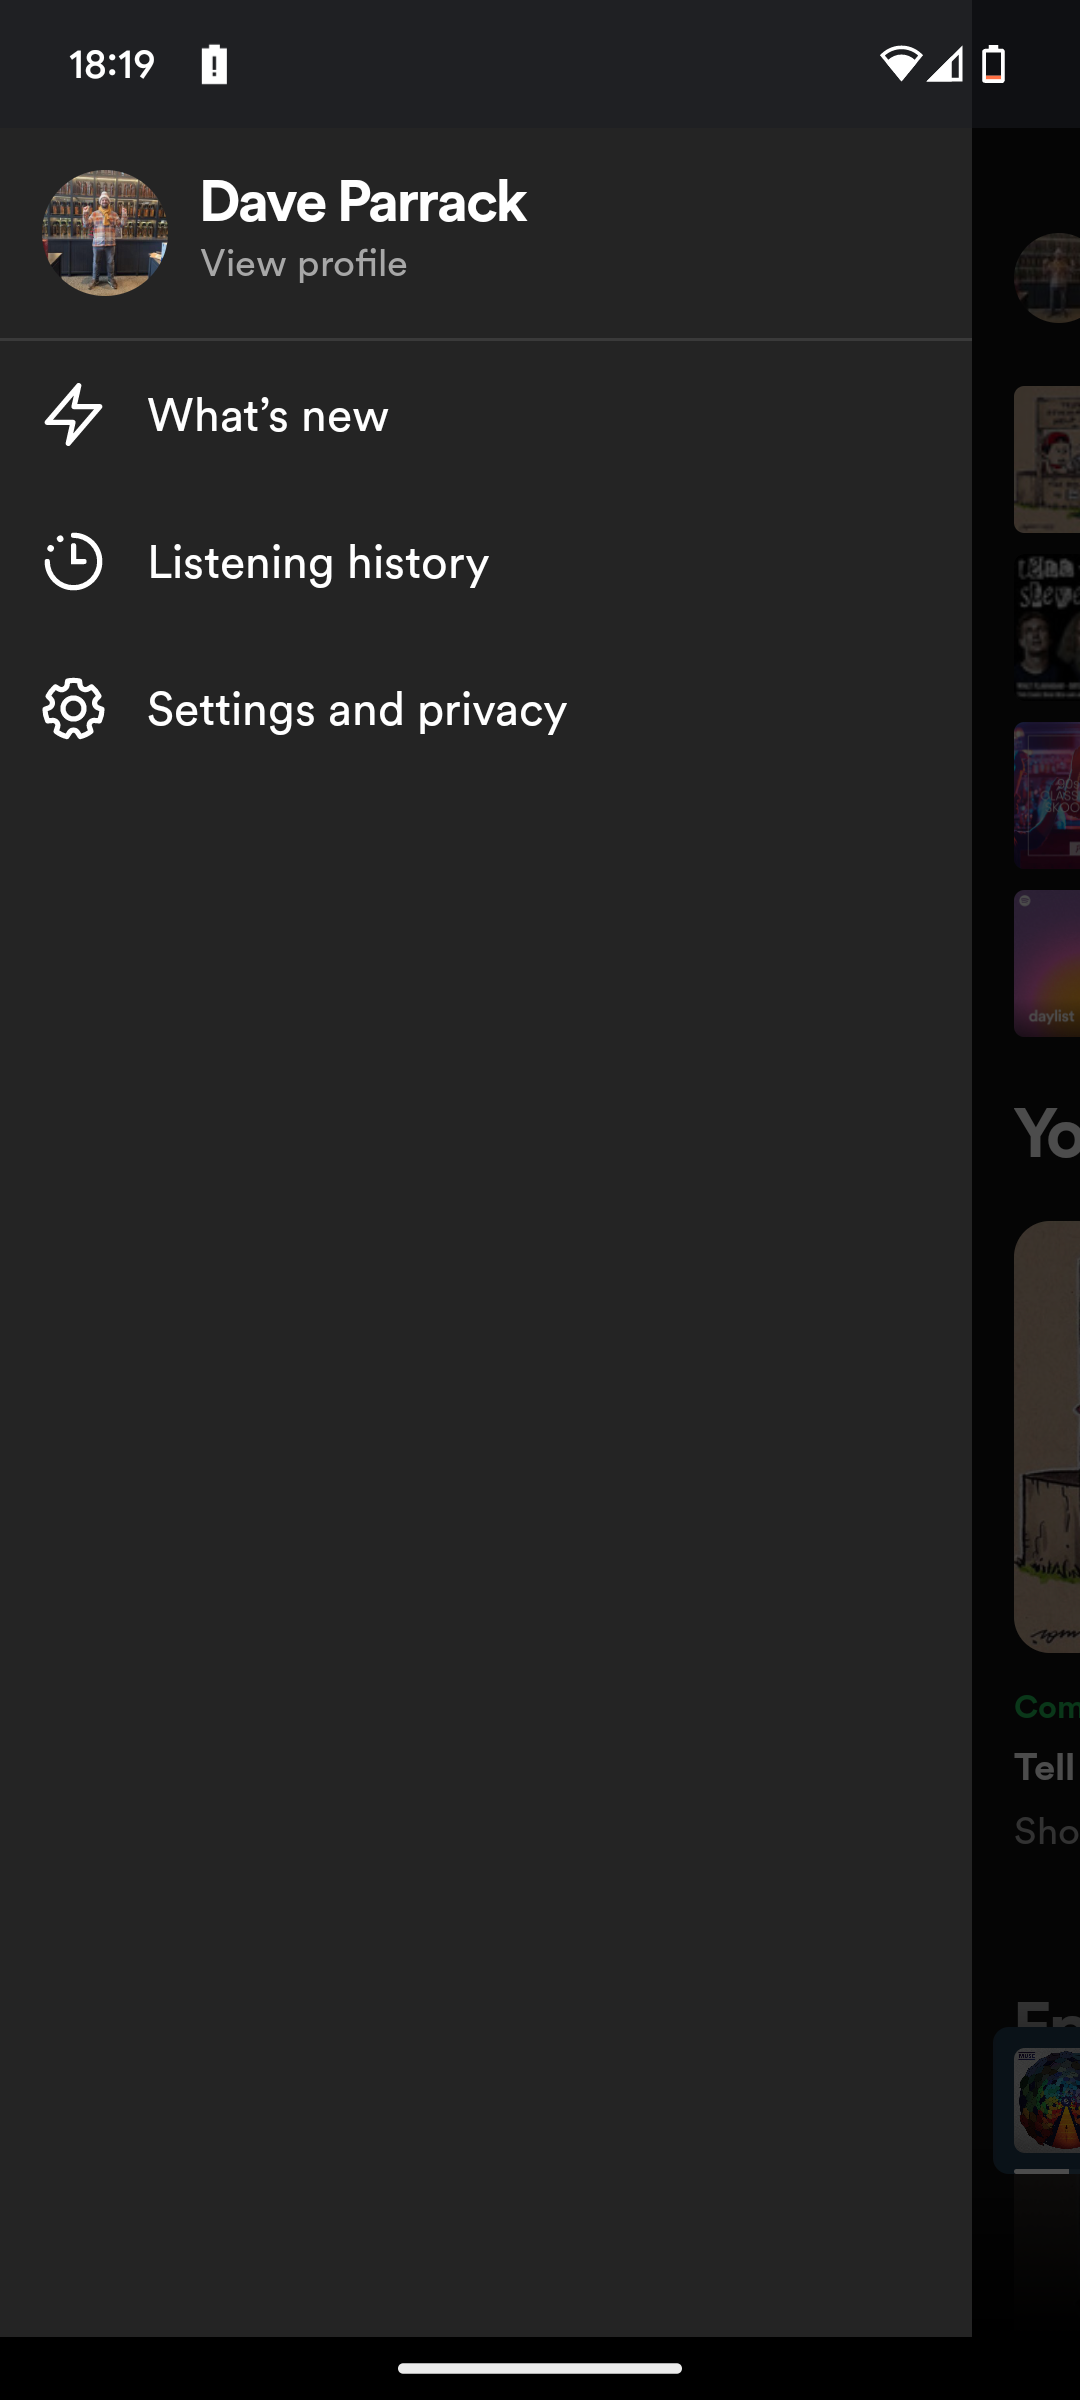 How to navigate to Spotify's Settings and Privacy page.